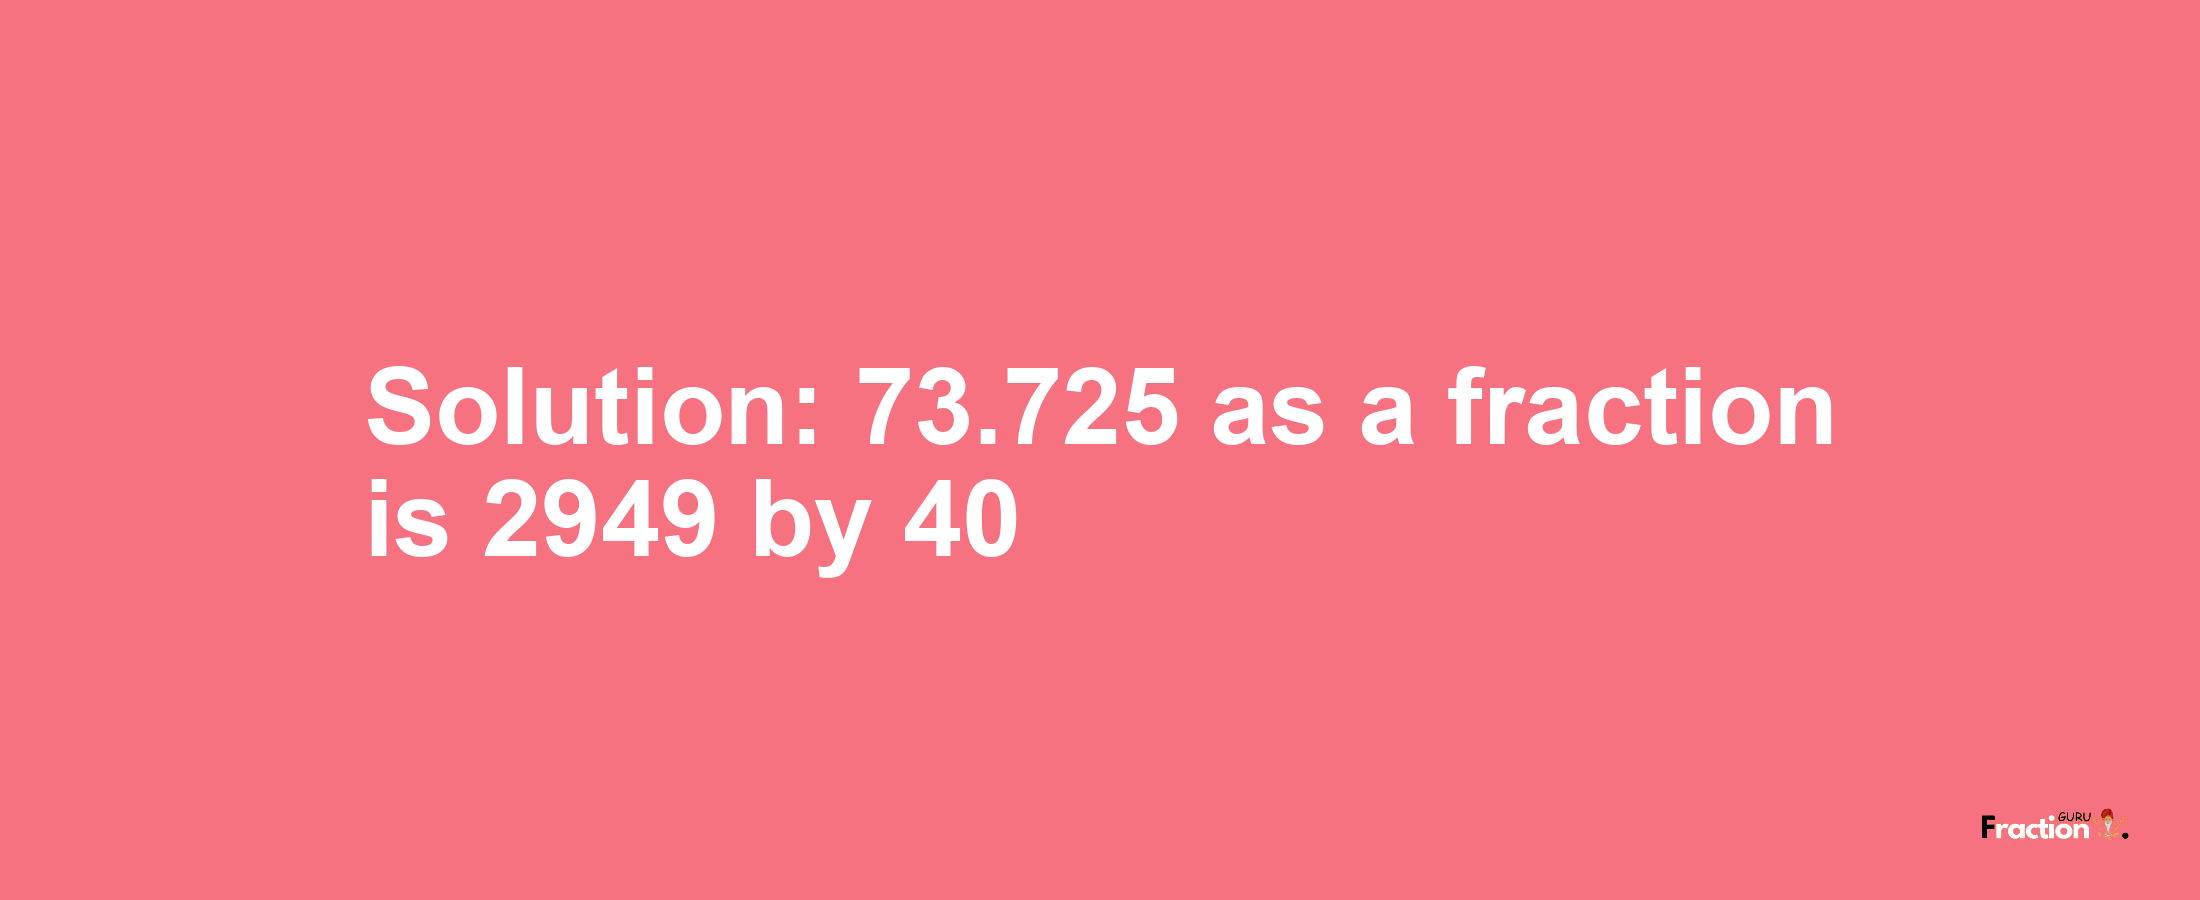 Solution:73.725 as a fraction is 2949/40